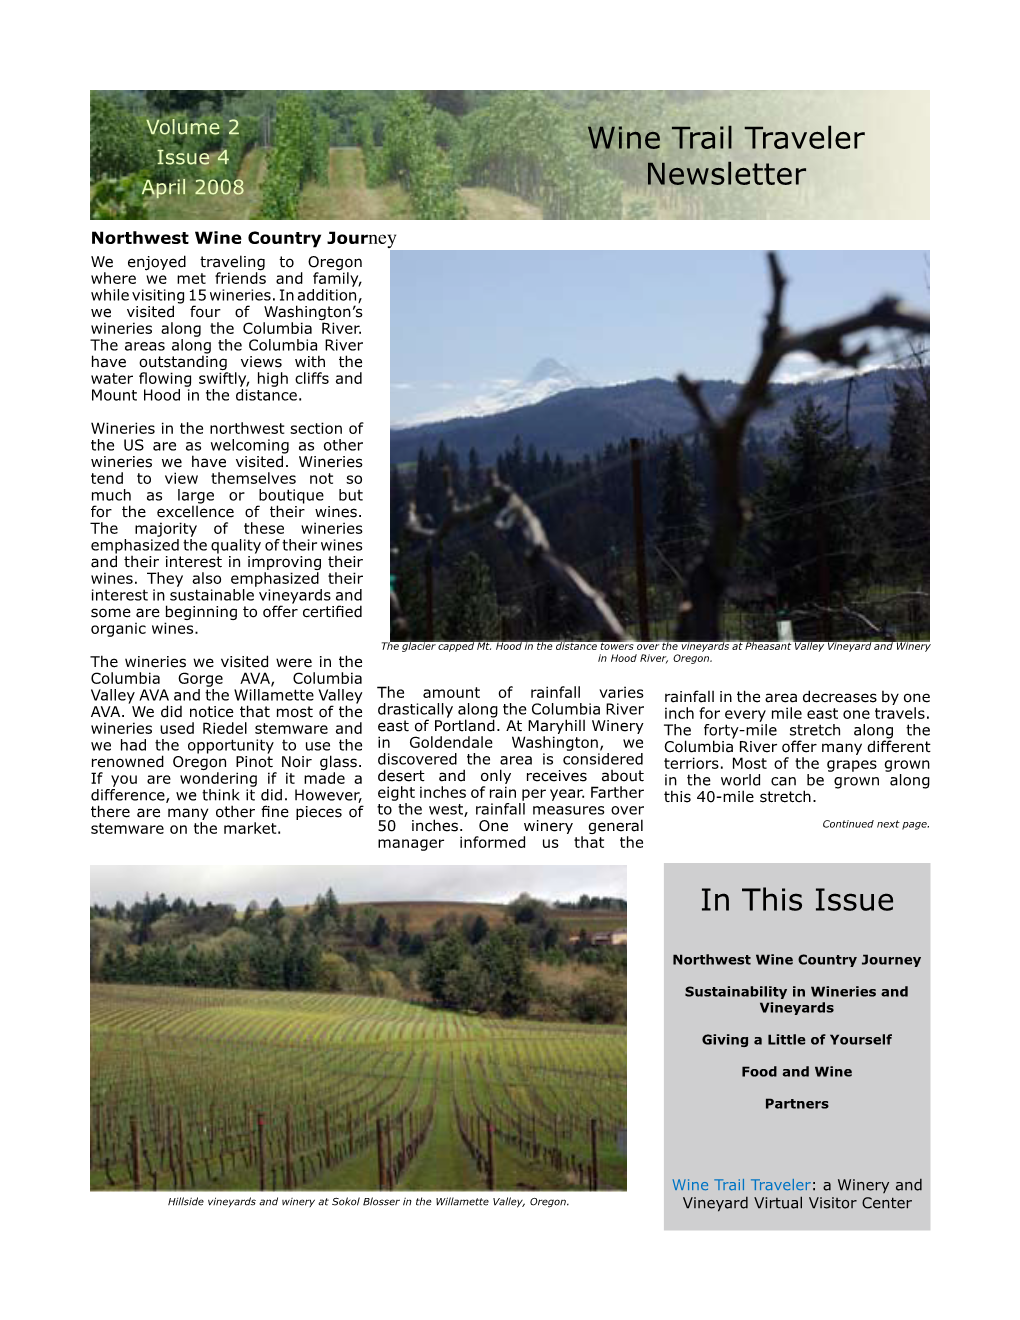 Wine Trail Traveler Newsletter in This Issue